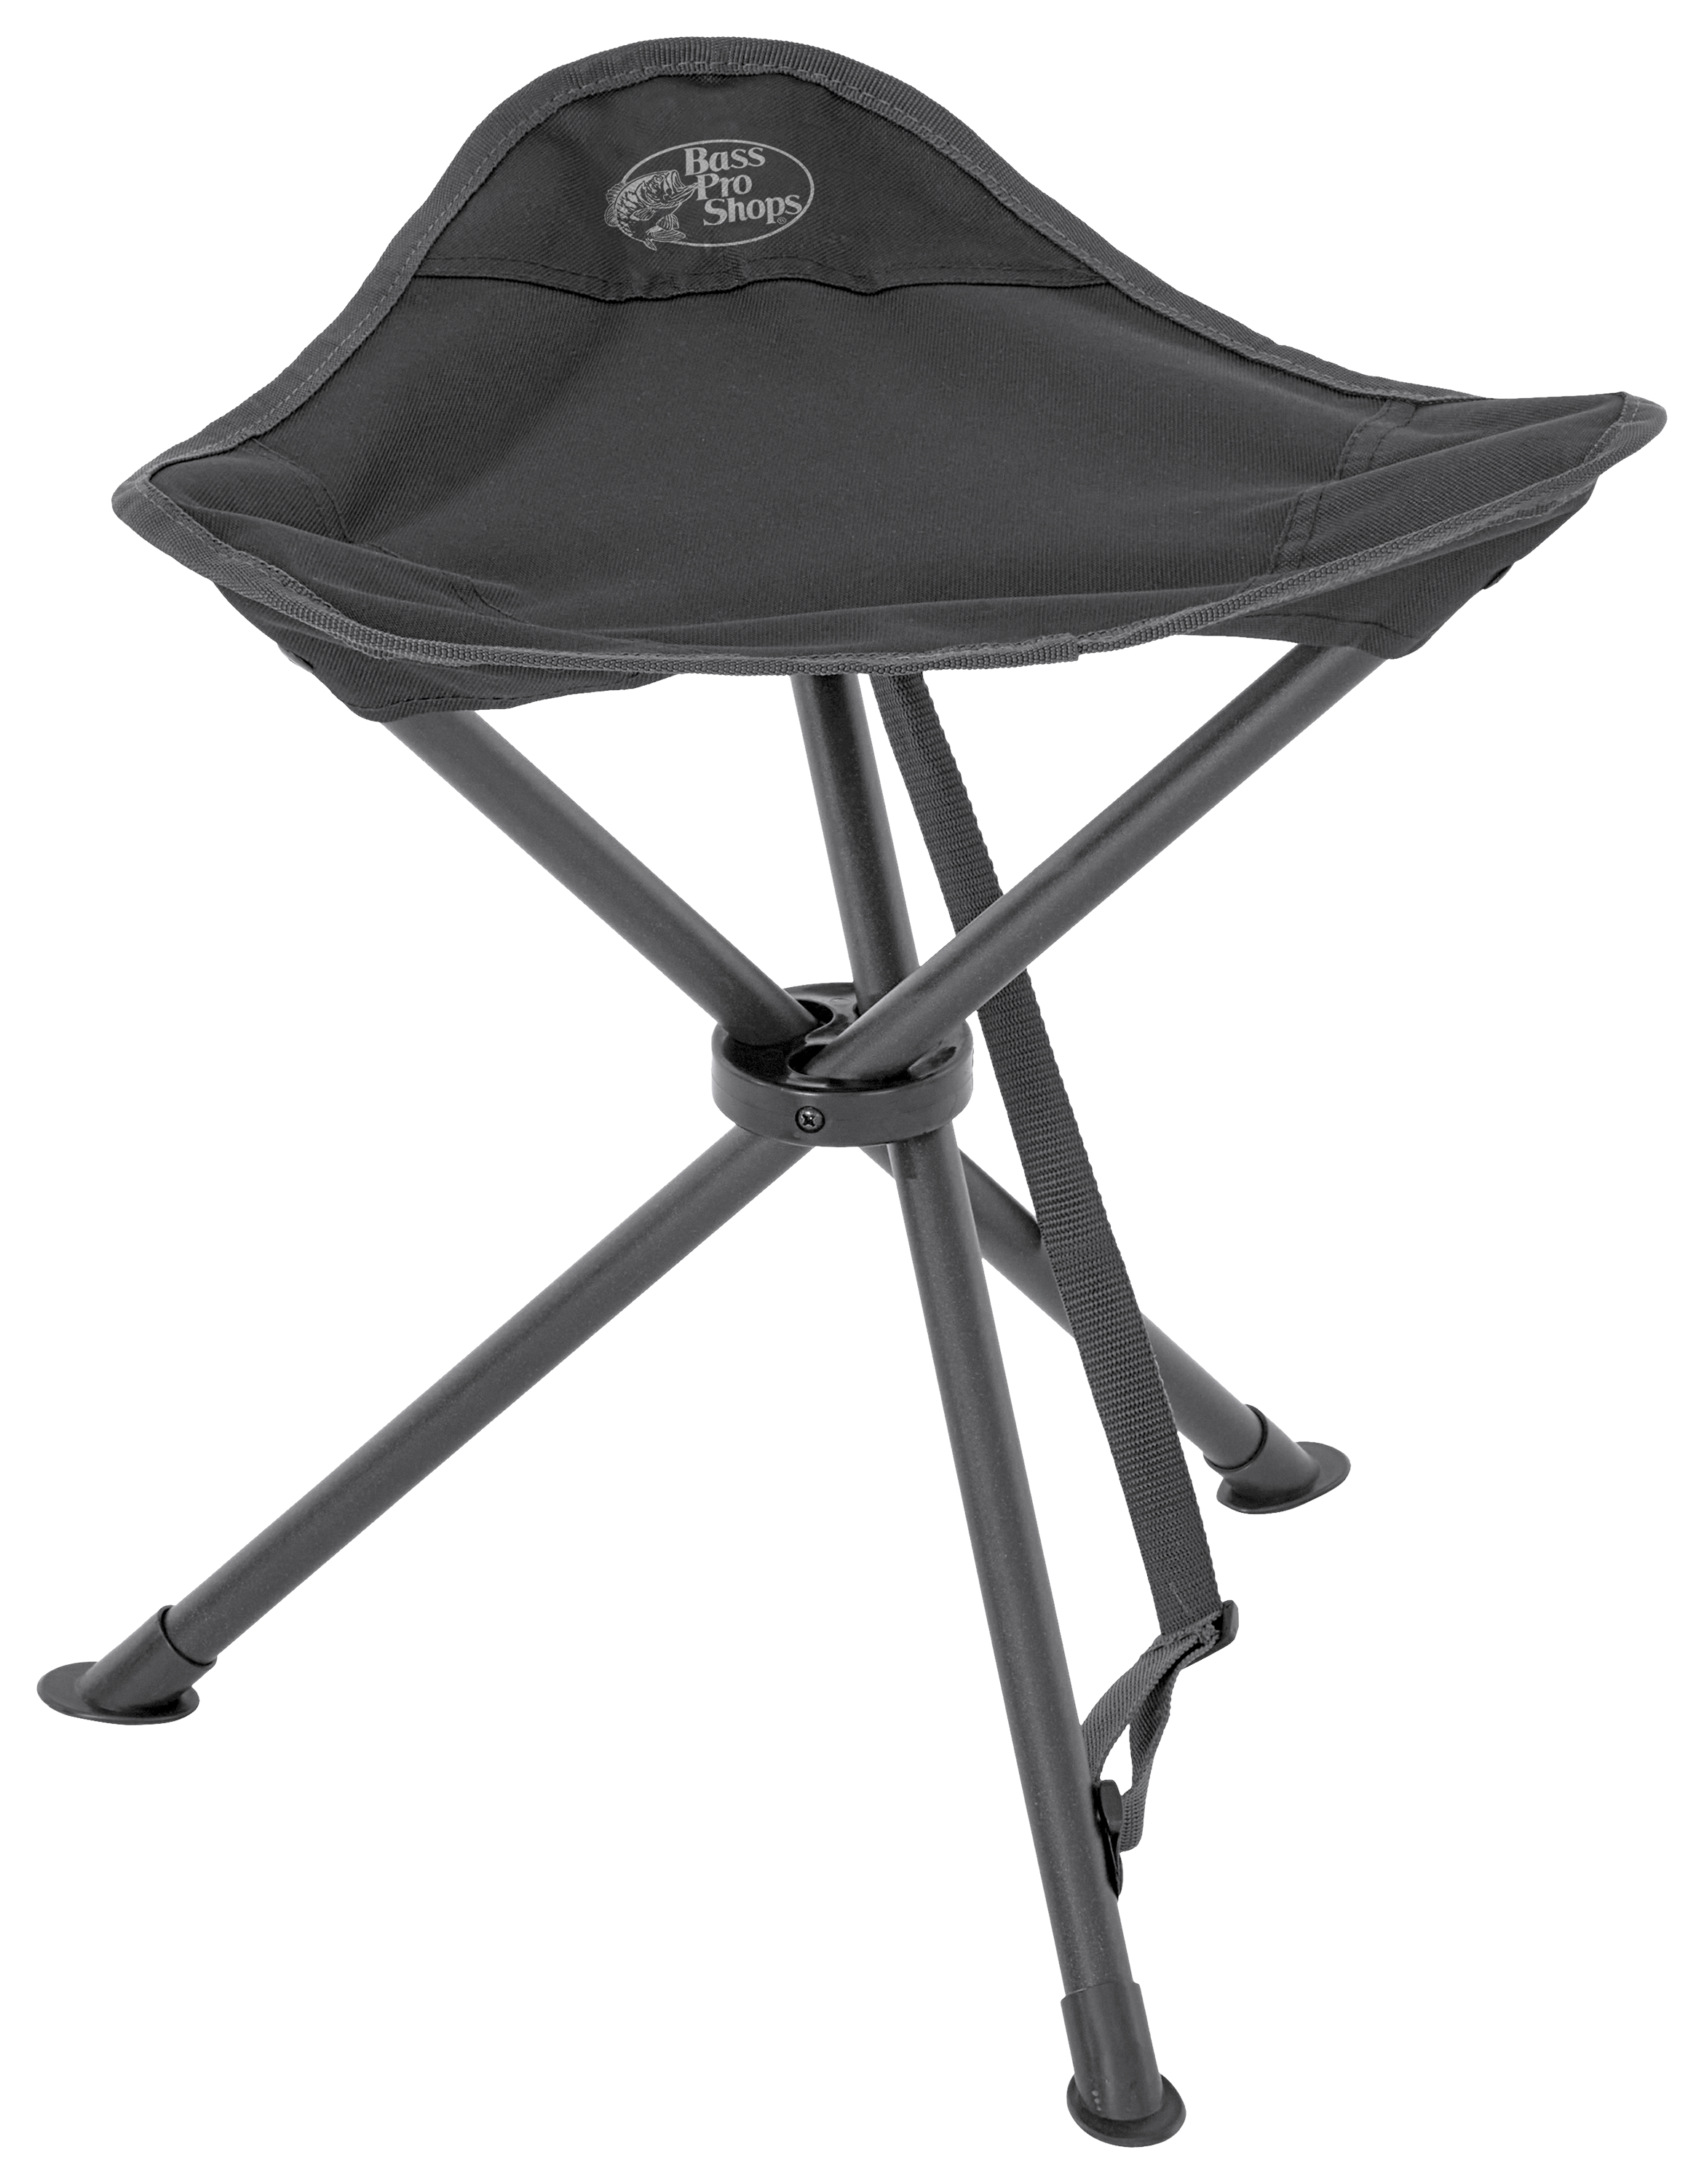 Portable Folding Stool Small Lightweight Travel Chair With Side